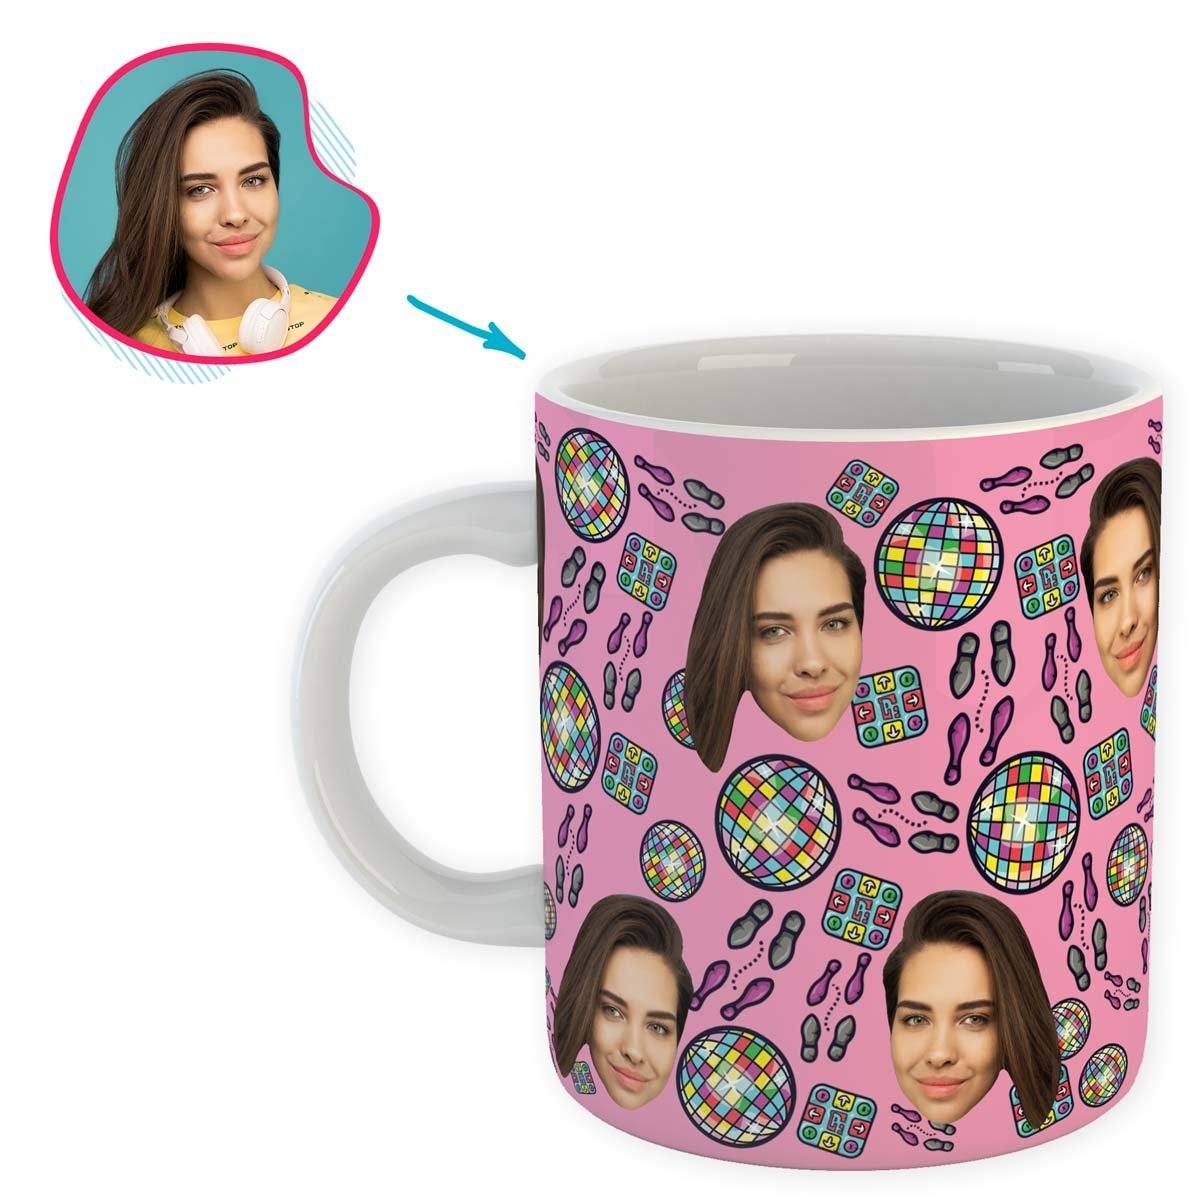 pink Dancing mug personalized with photo of face printed on it